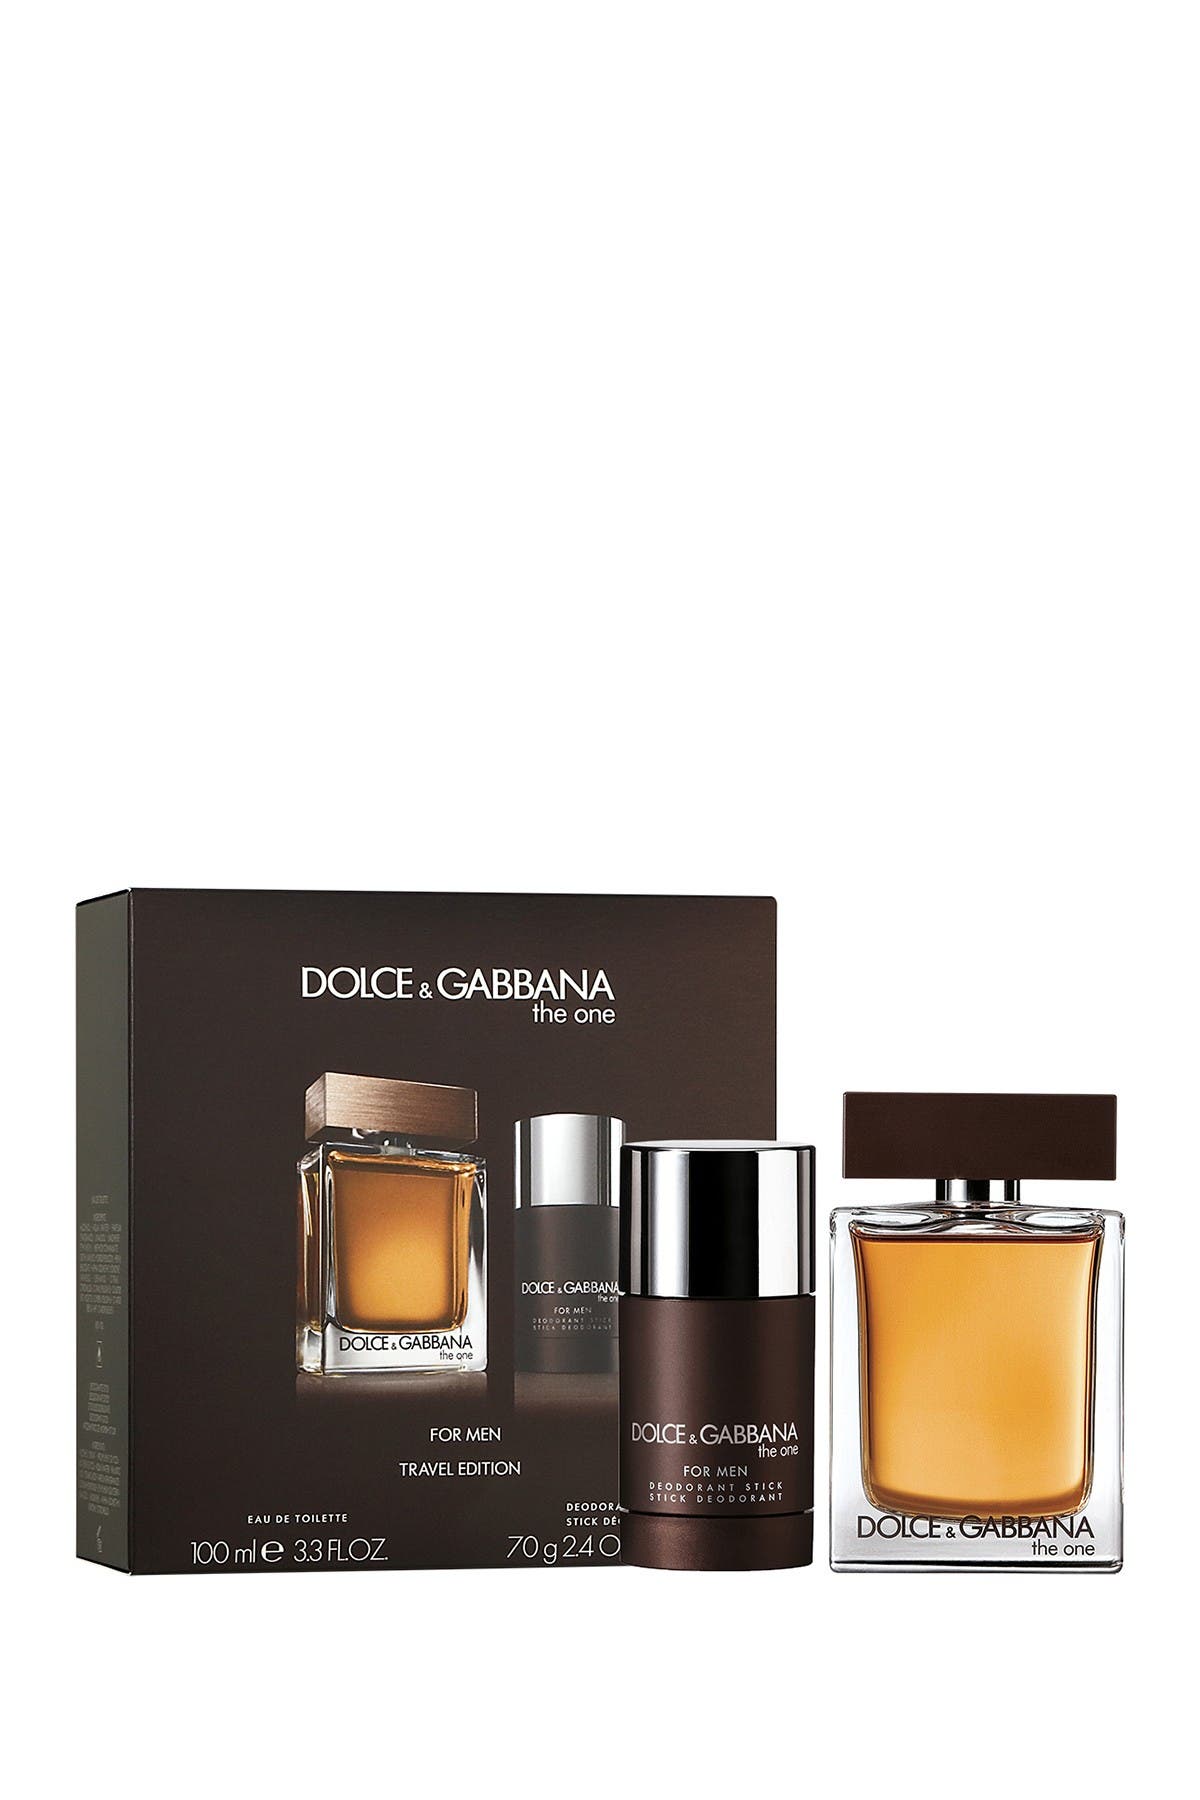 dolce and gabbana the one travel edition